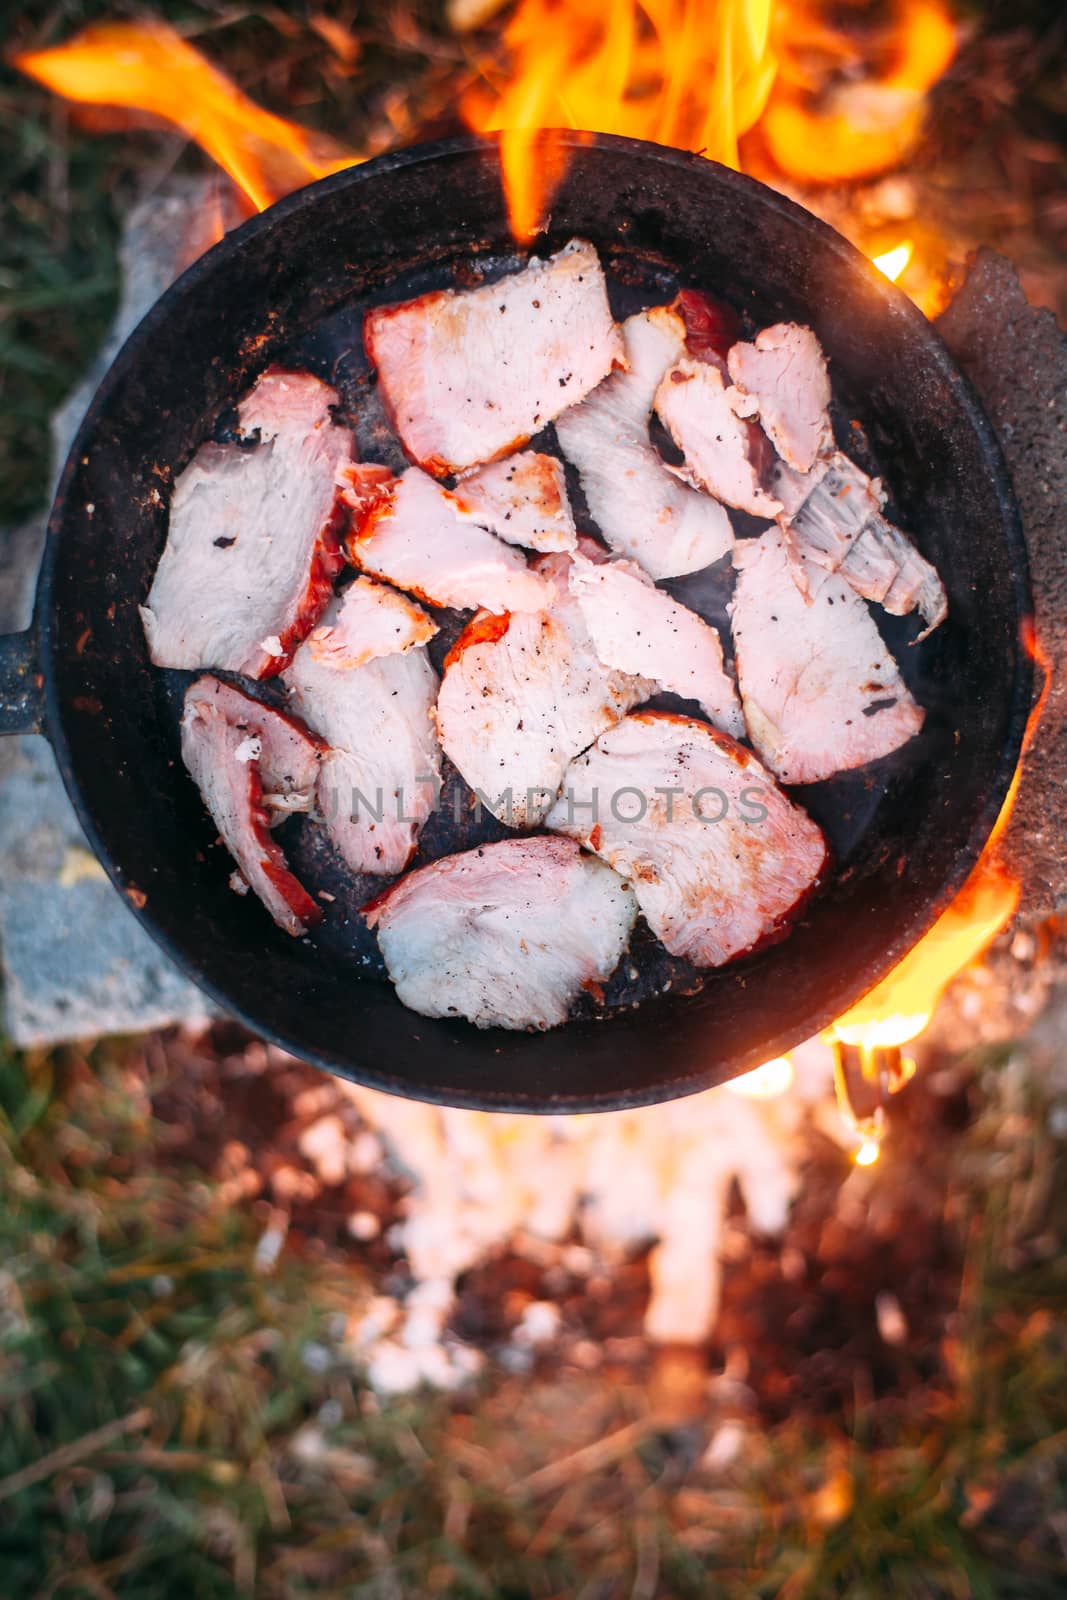 Slices of fried bacon in a pan. Food in a forest camp. Cooking o by Opikanets